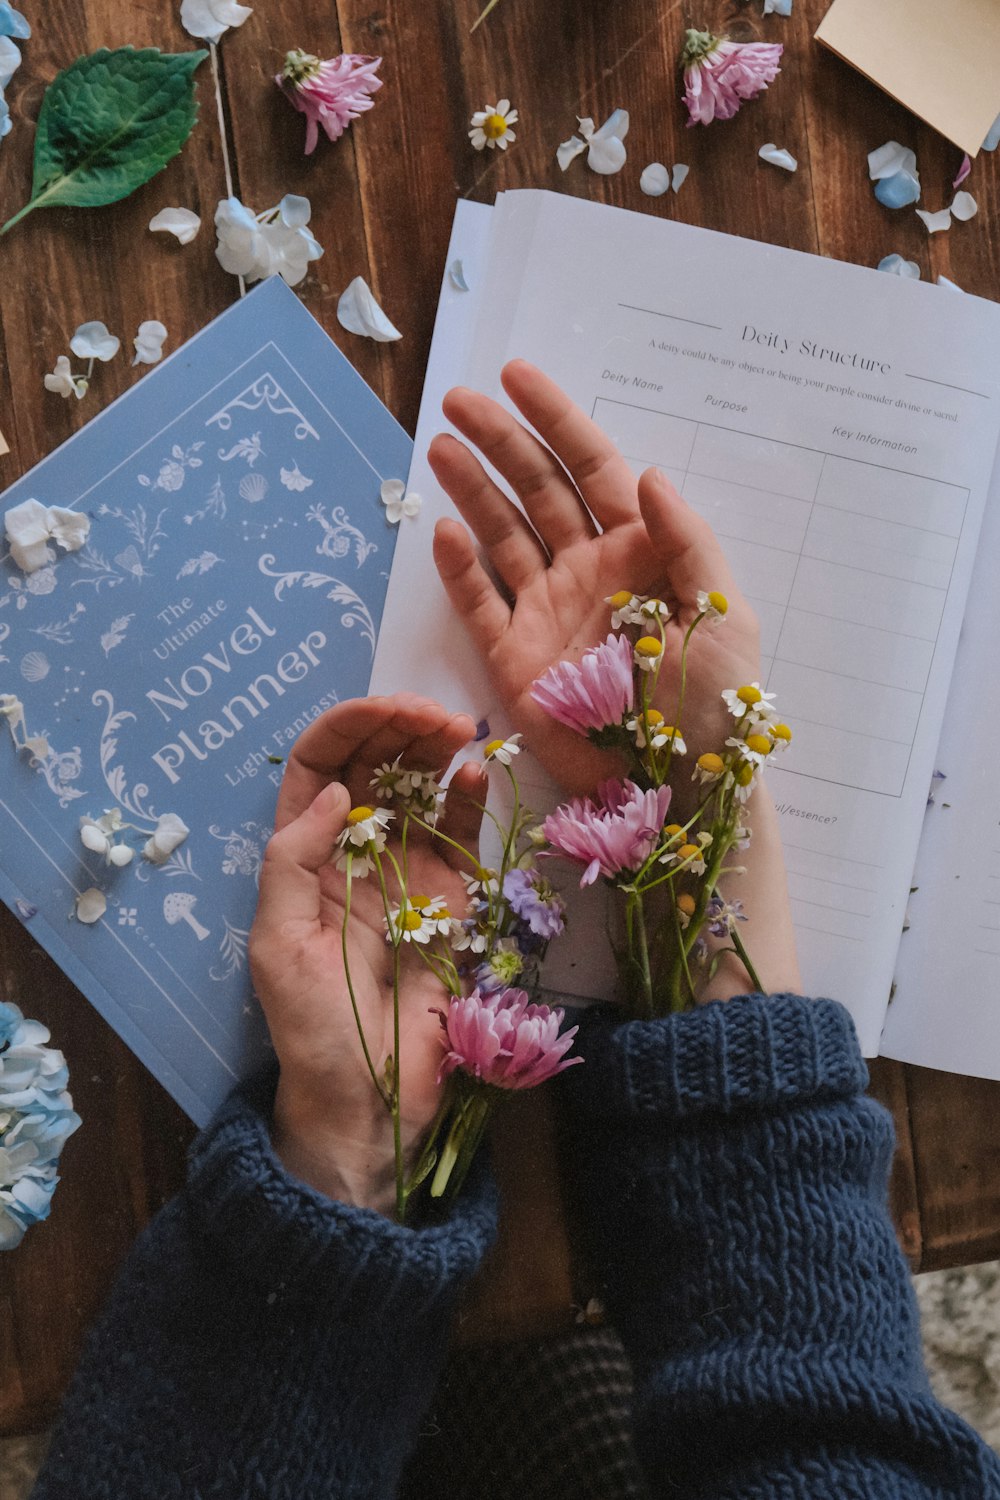 a person holding flowers next to a book